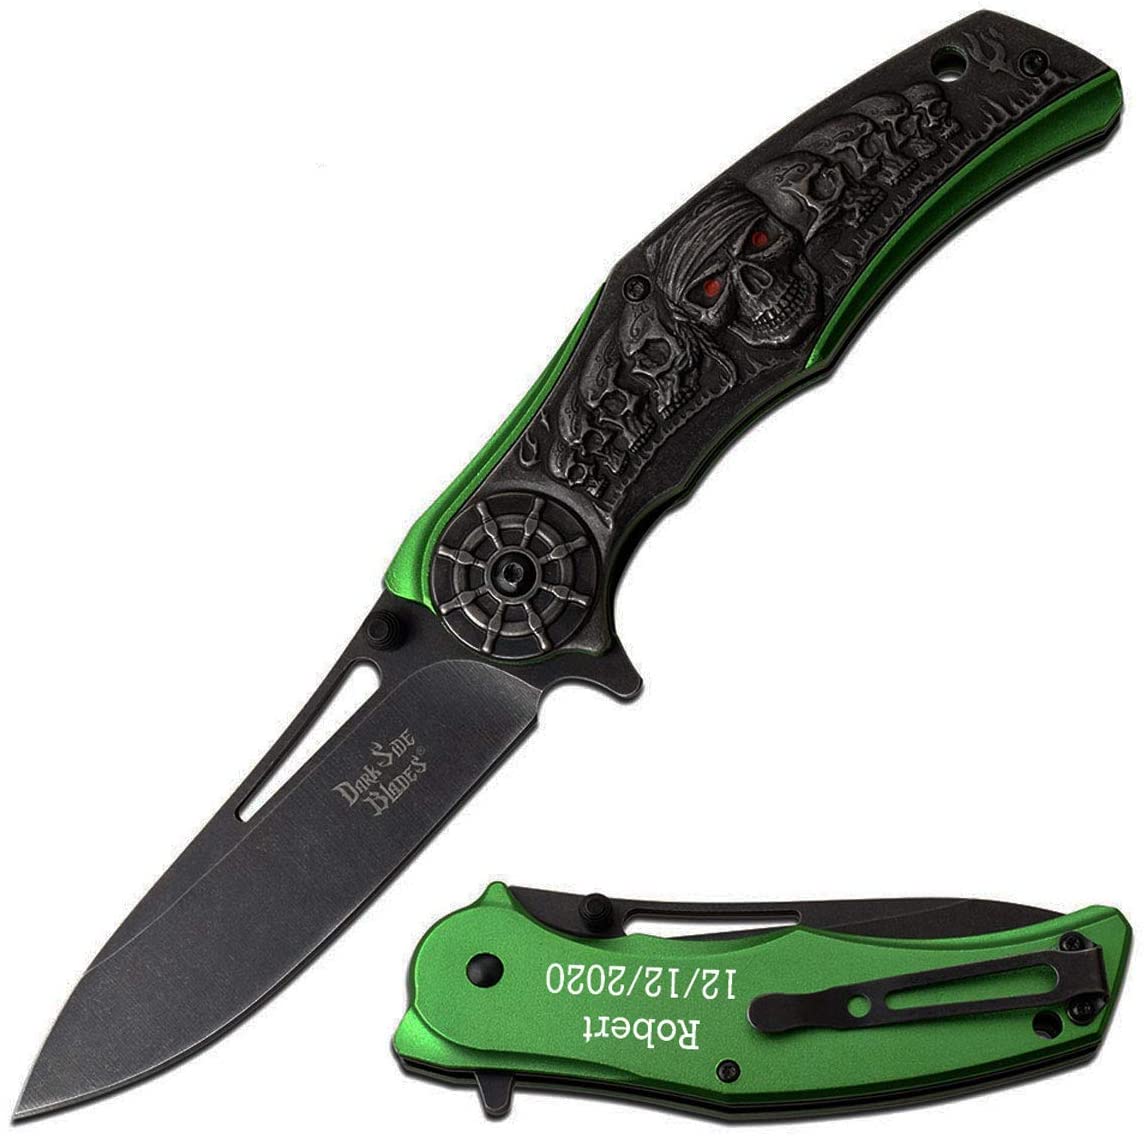 Gifts Infinity Skull Personalized Laser Engraved Assisted Opening 8.9" Pocket Knife, Fathers Day, Groomsmen Gift (Green)